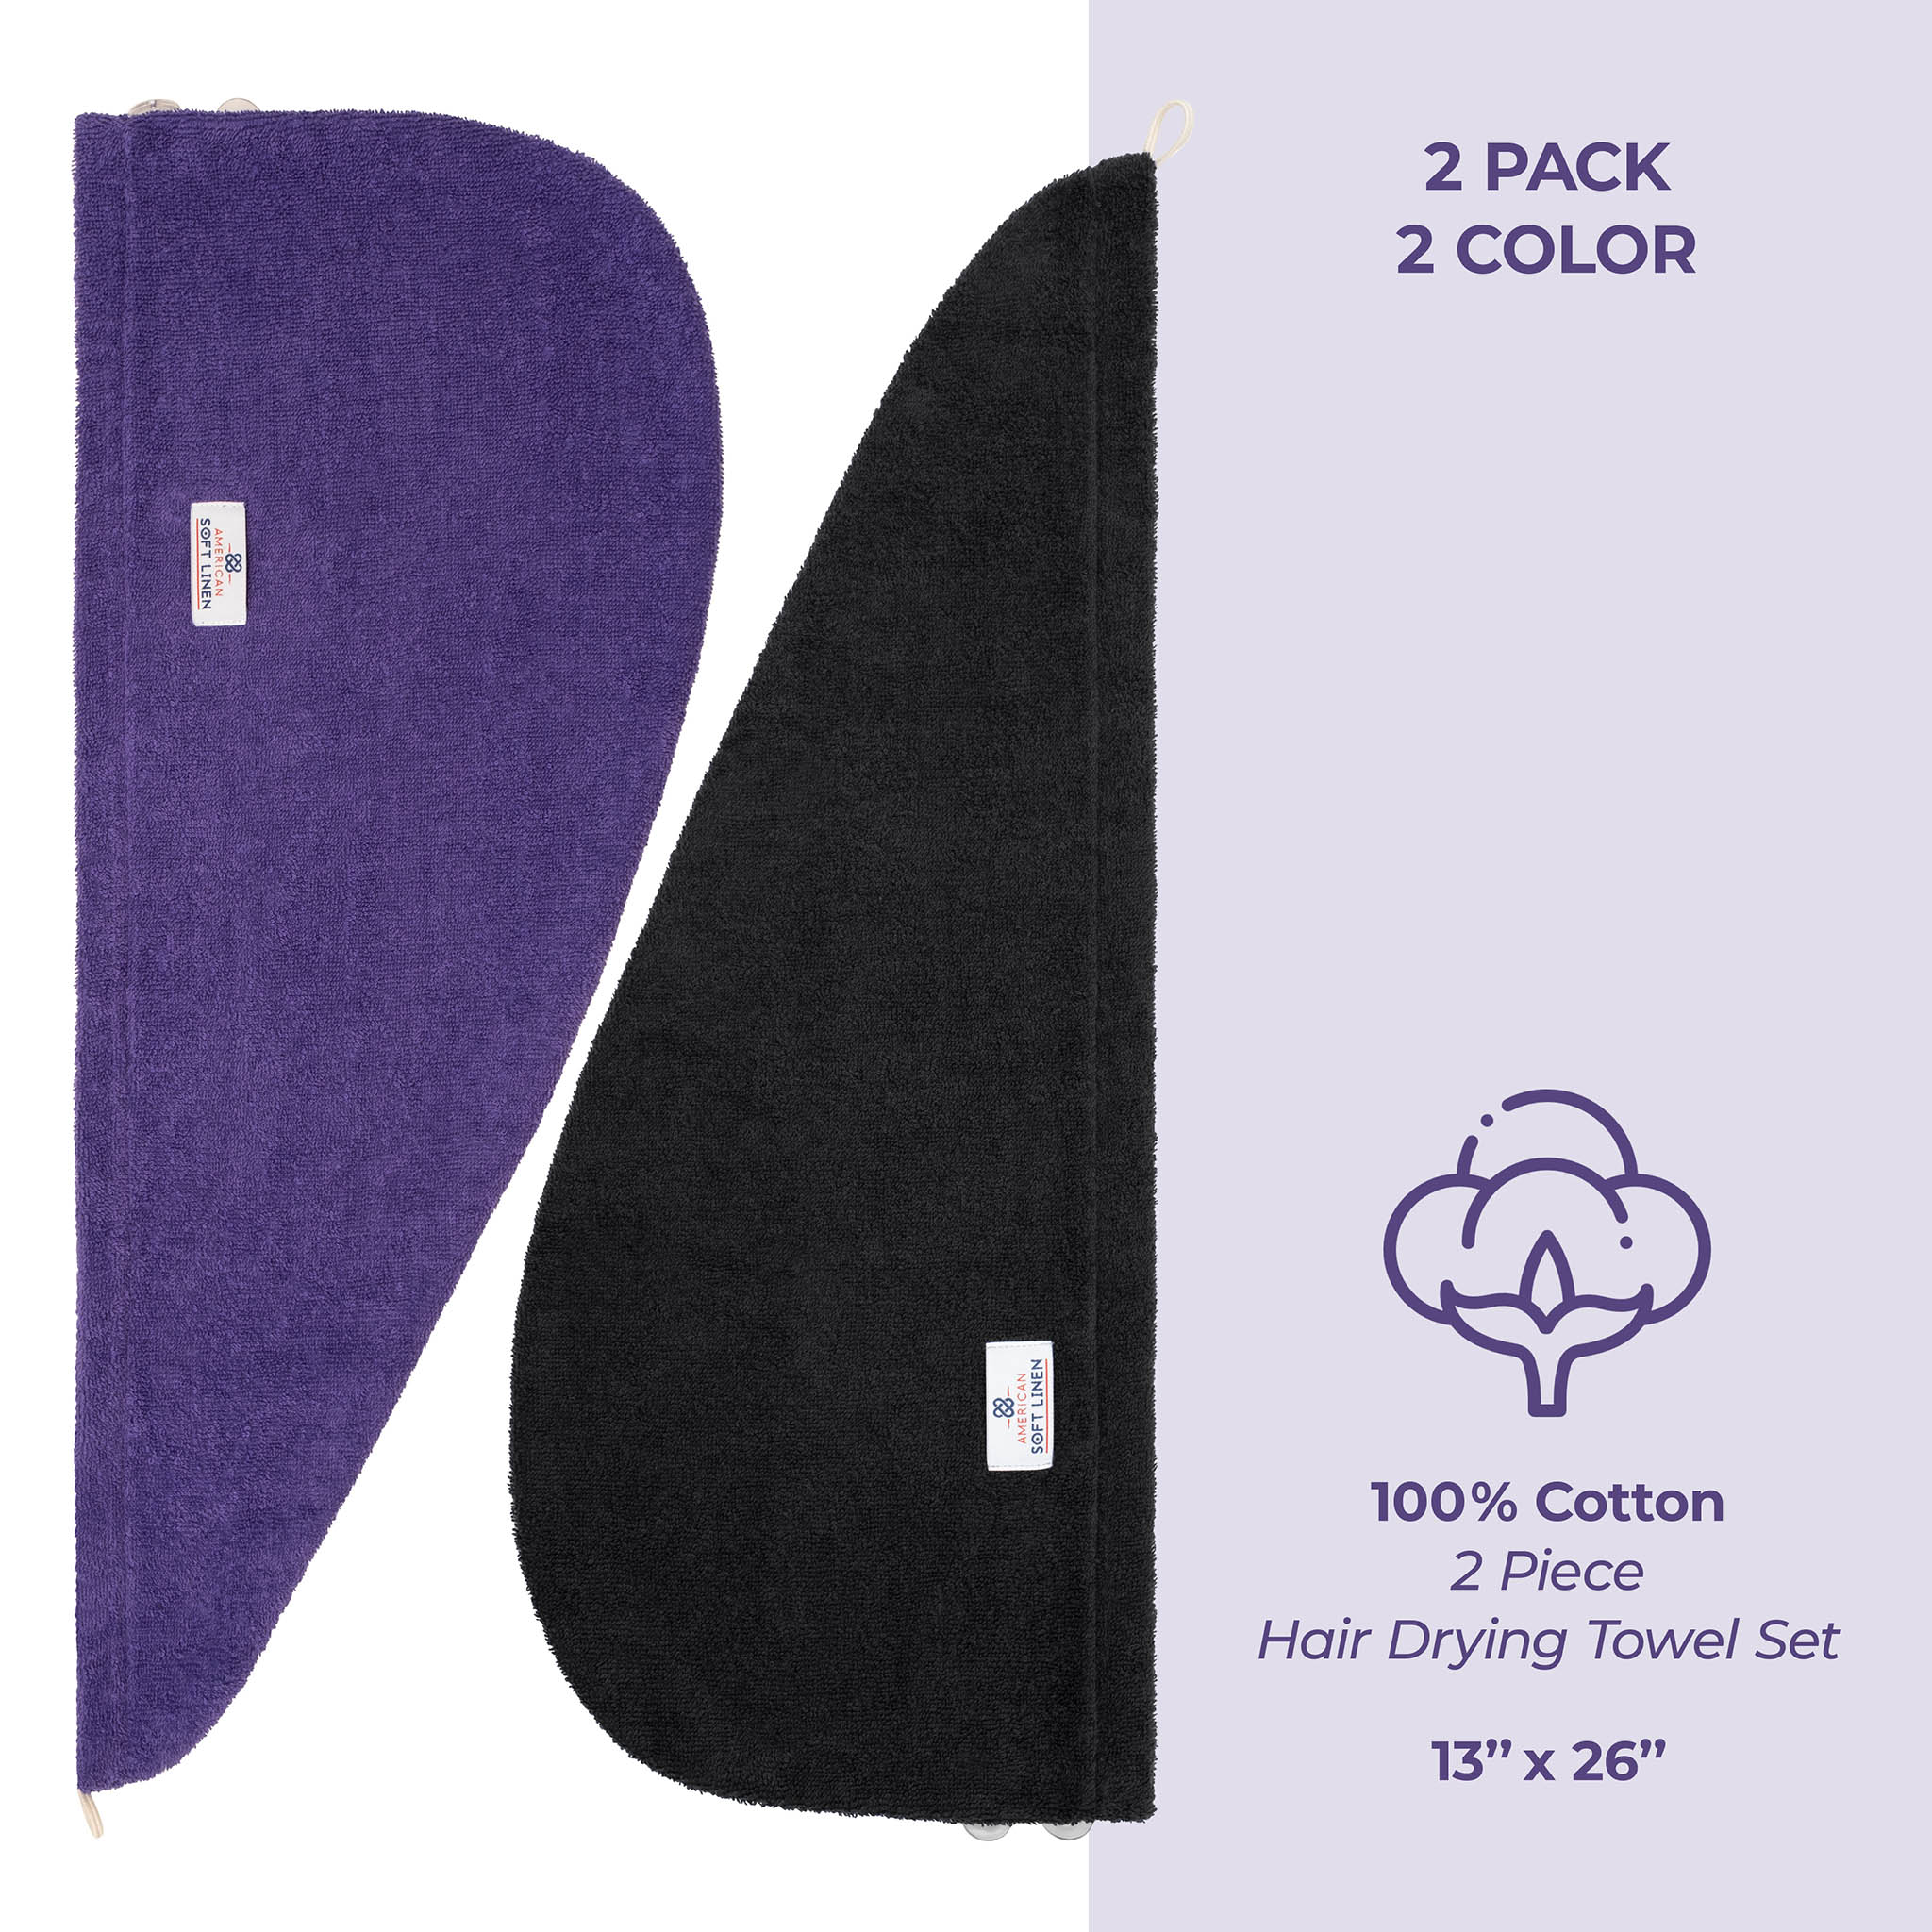 American Soft Linen 100% Cotton Hair Drying Towels for Women Purple-Black-5